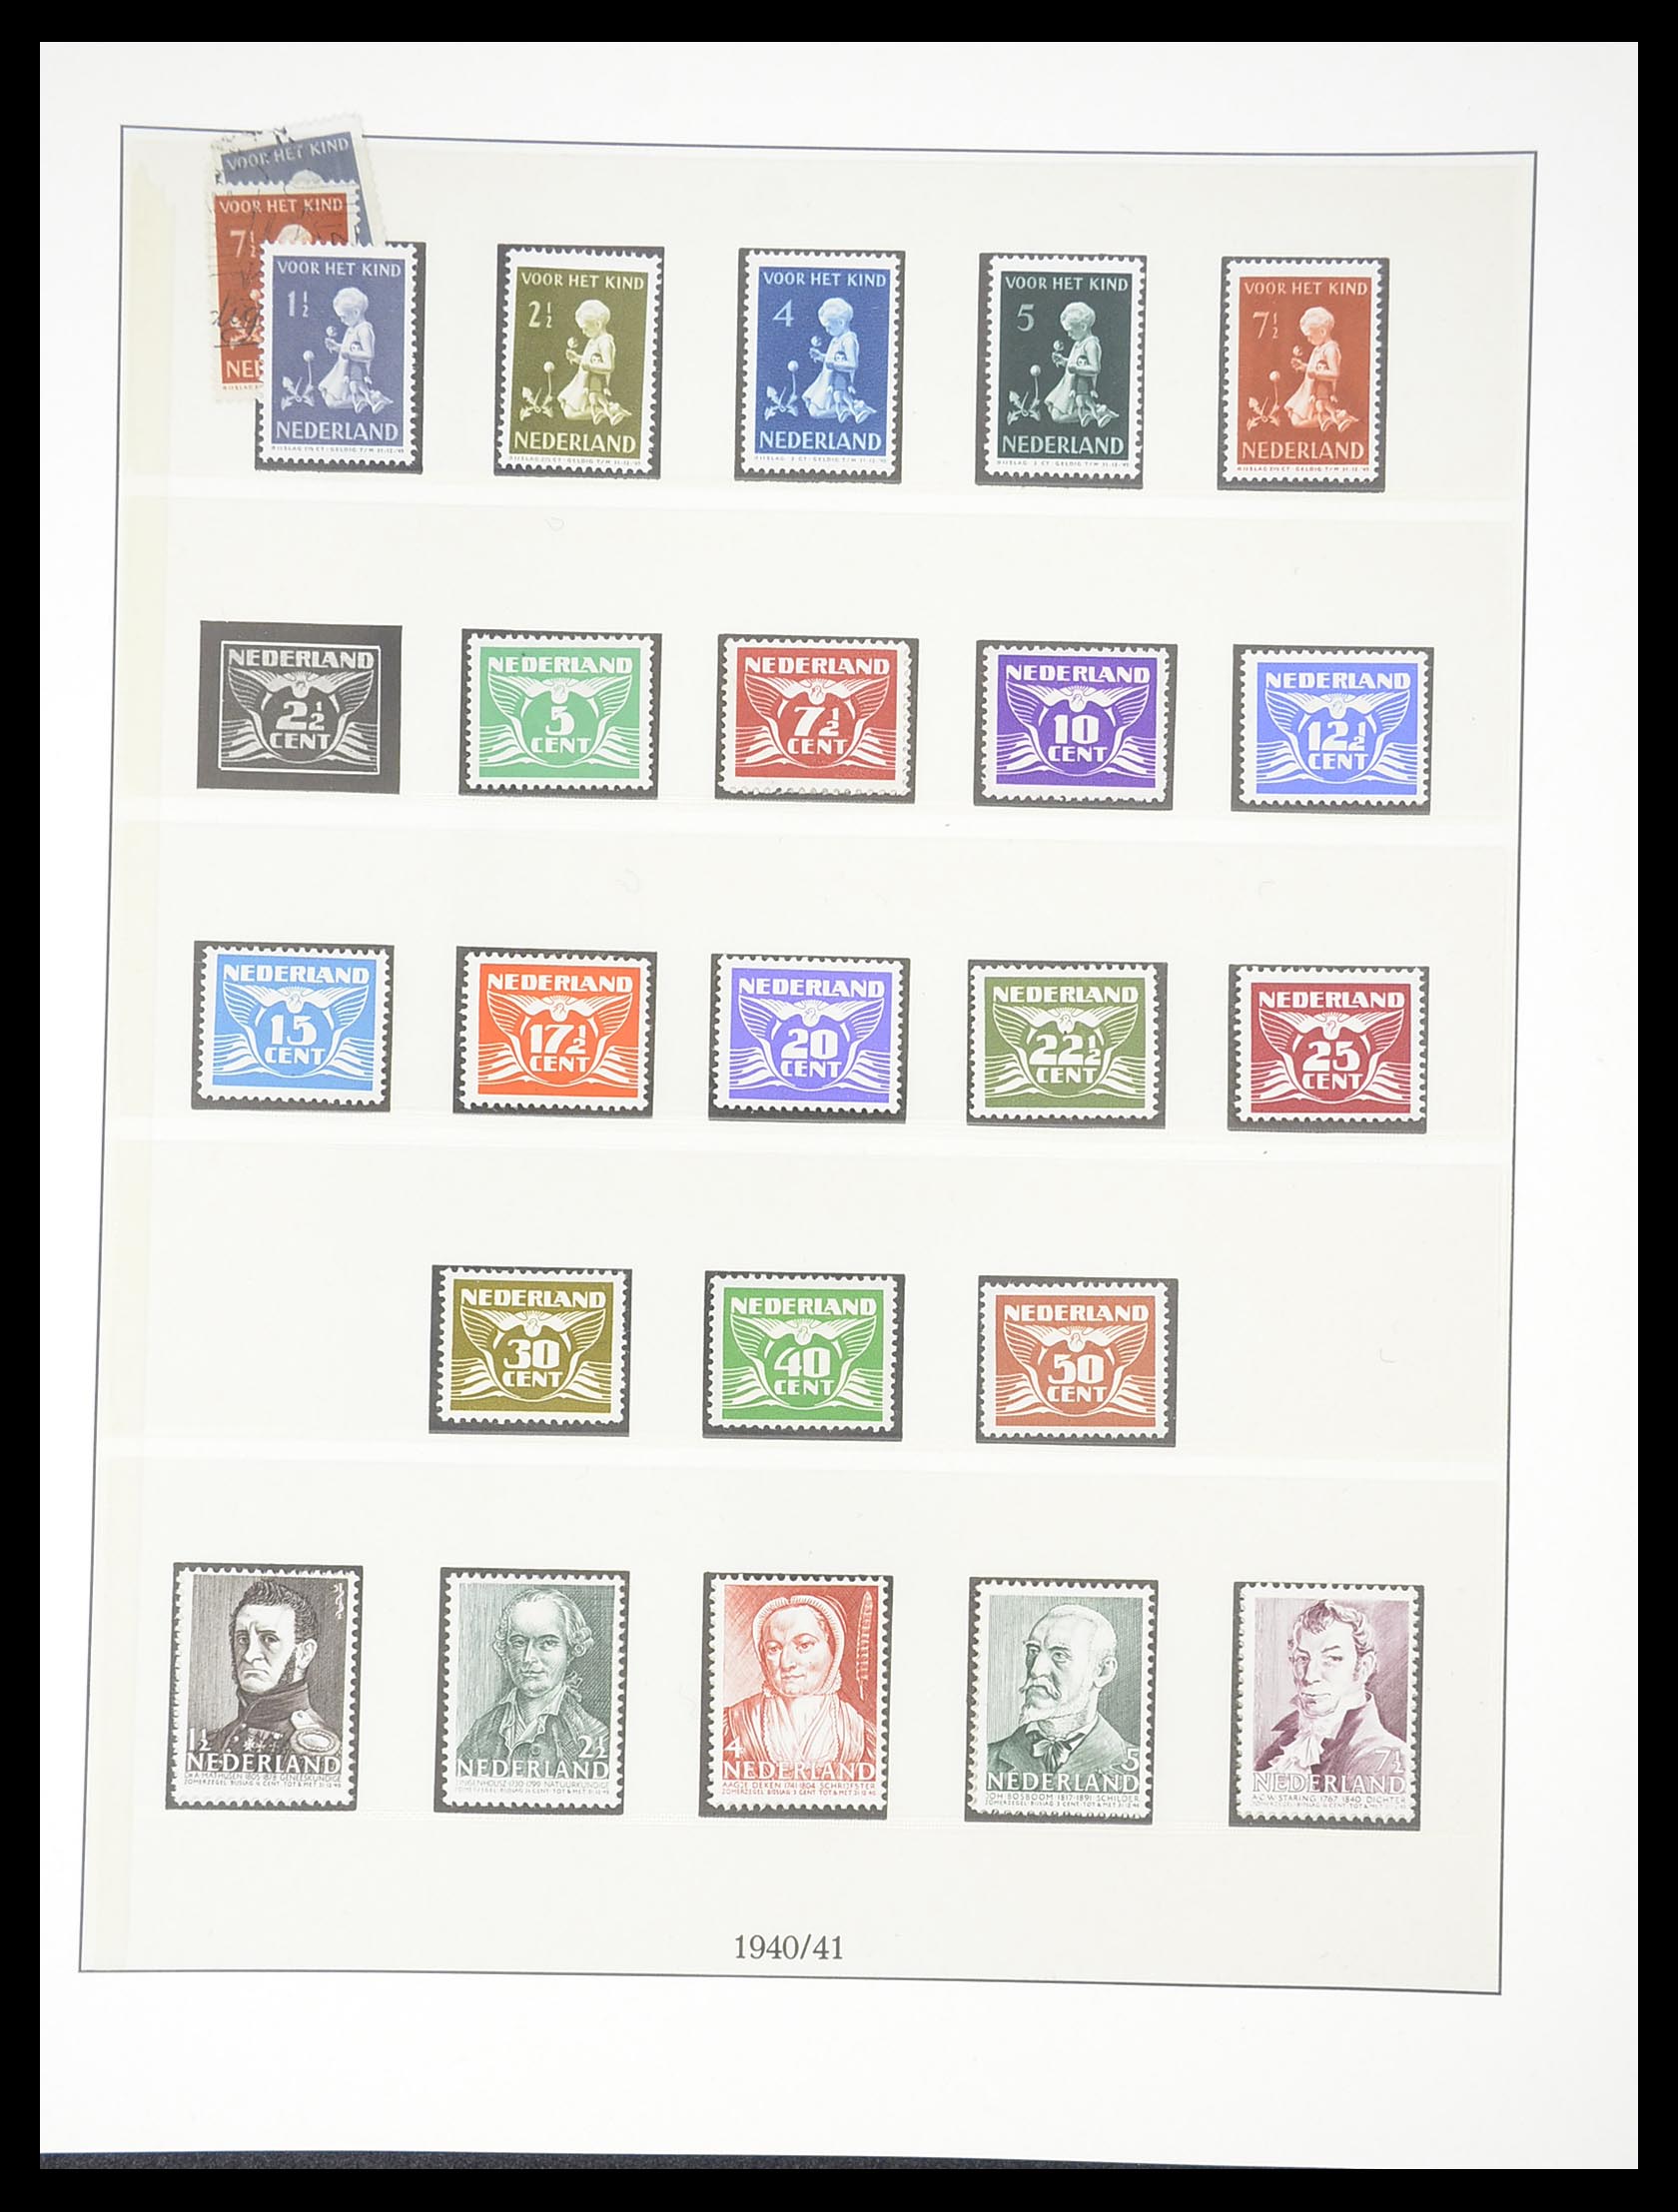 33189 035 - Stamp collection 33189 European countries 1850-1950.